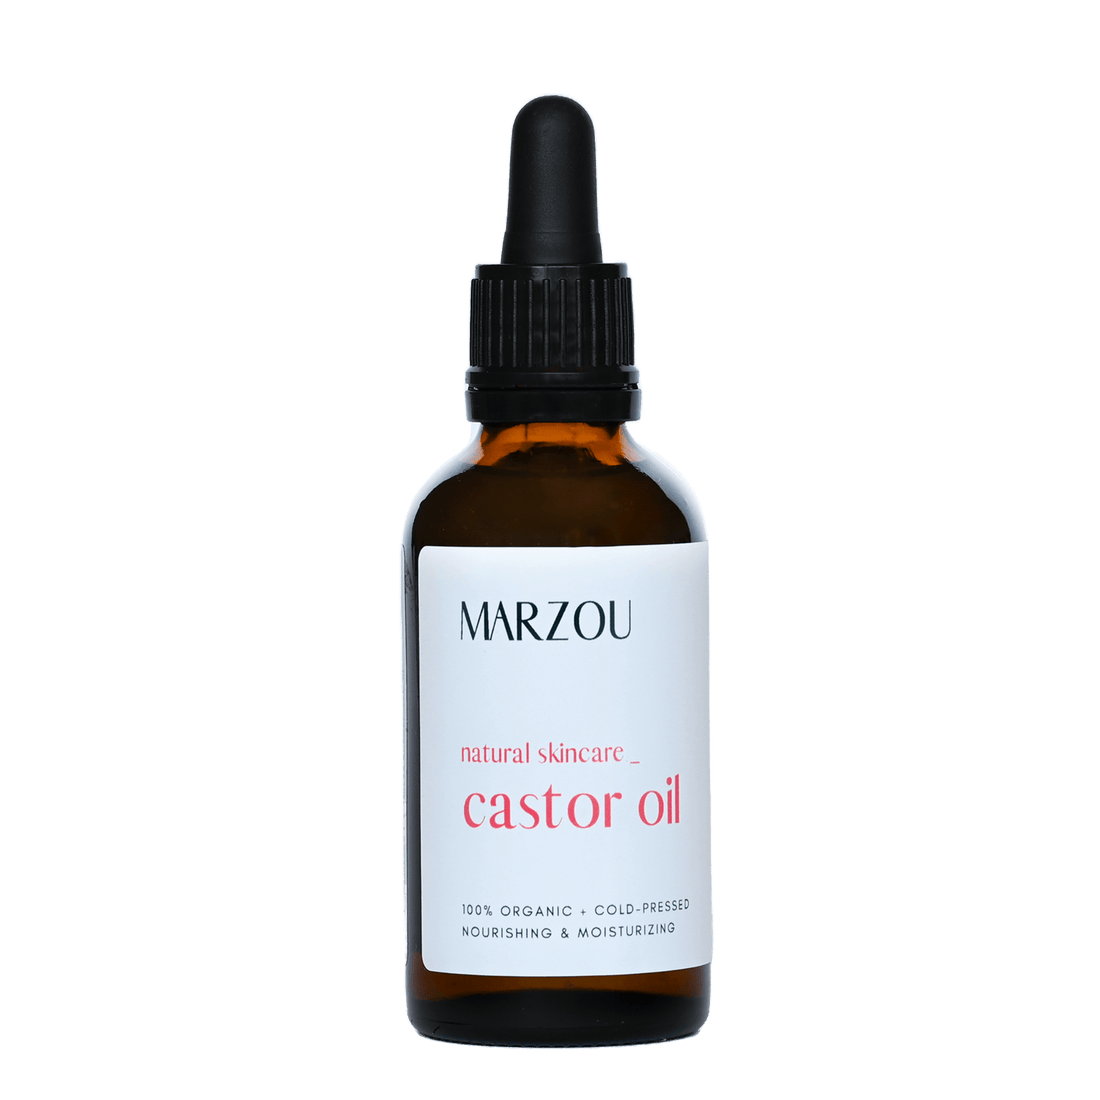 castor oil 50 ml organic and cold-pressed